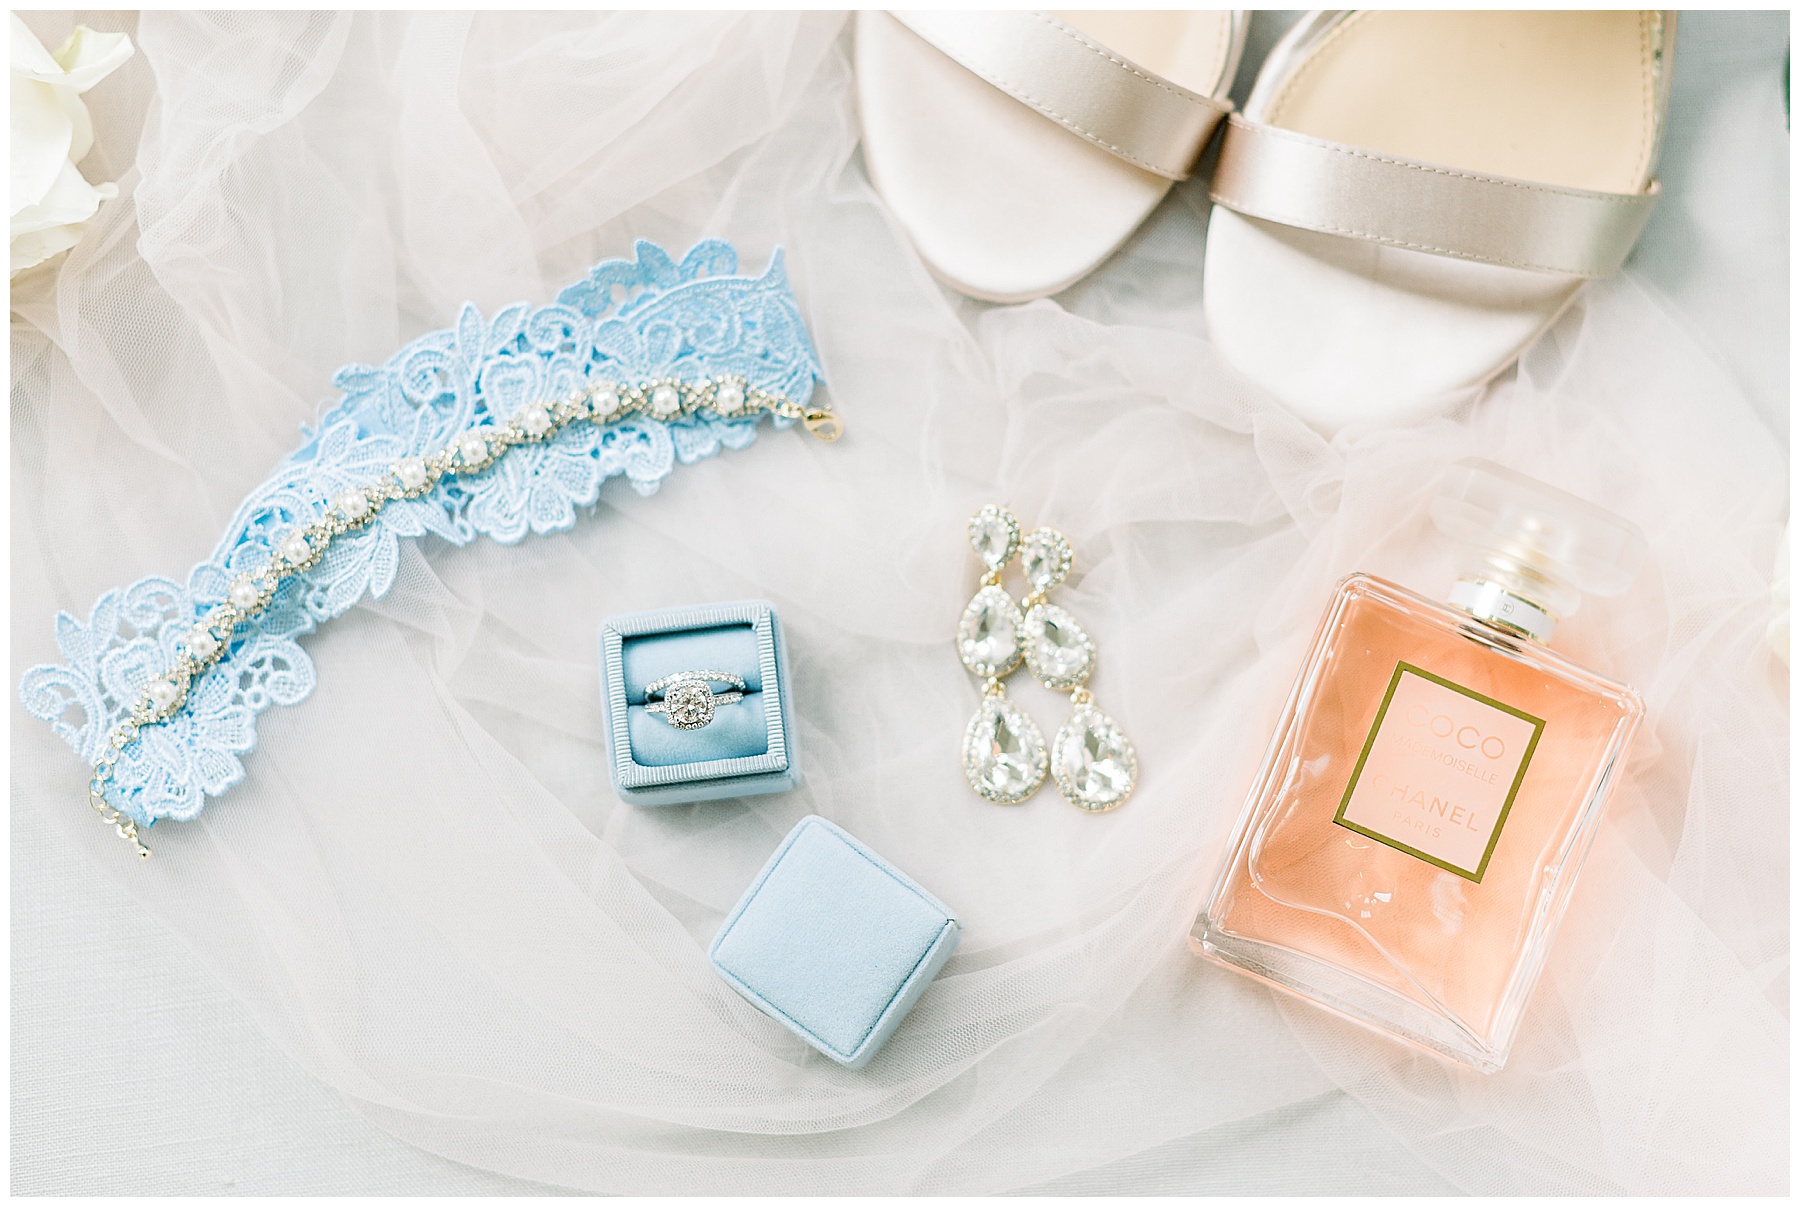 brides wedding shoes, ring, earring, and coco chanel perfume